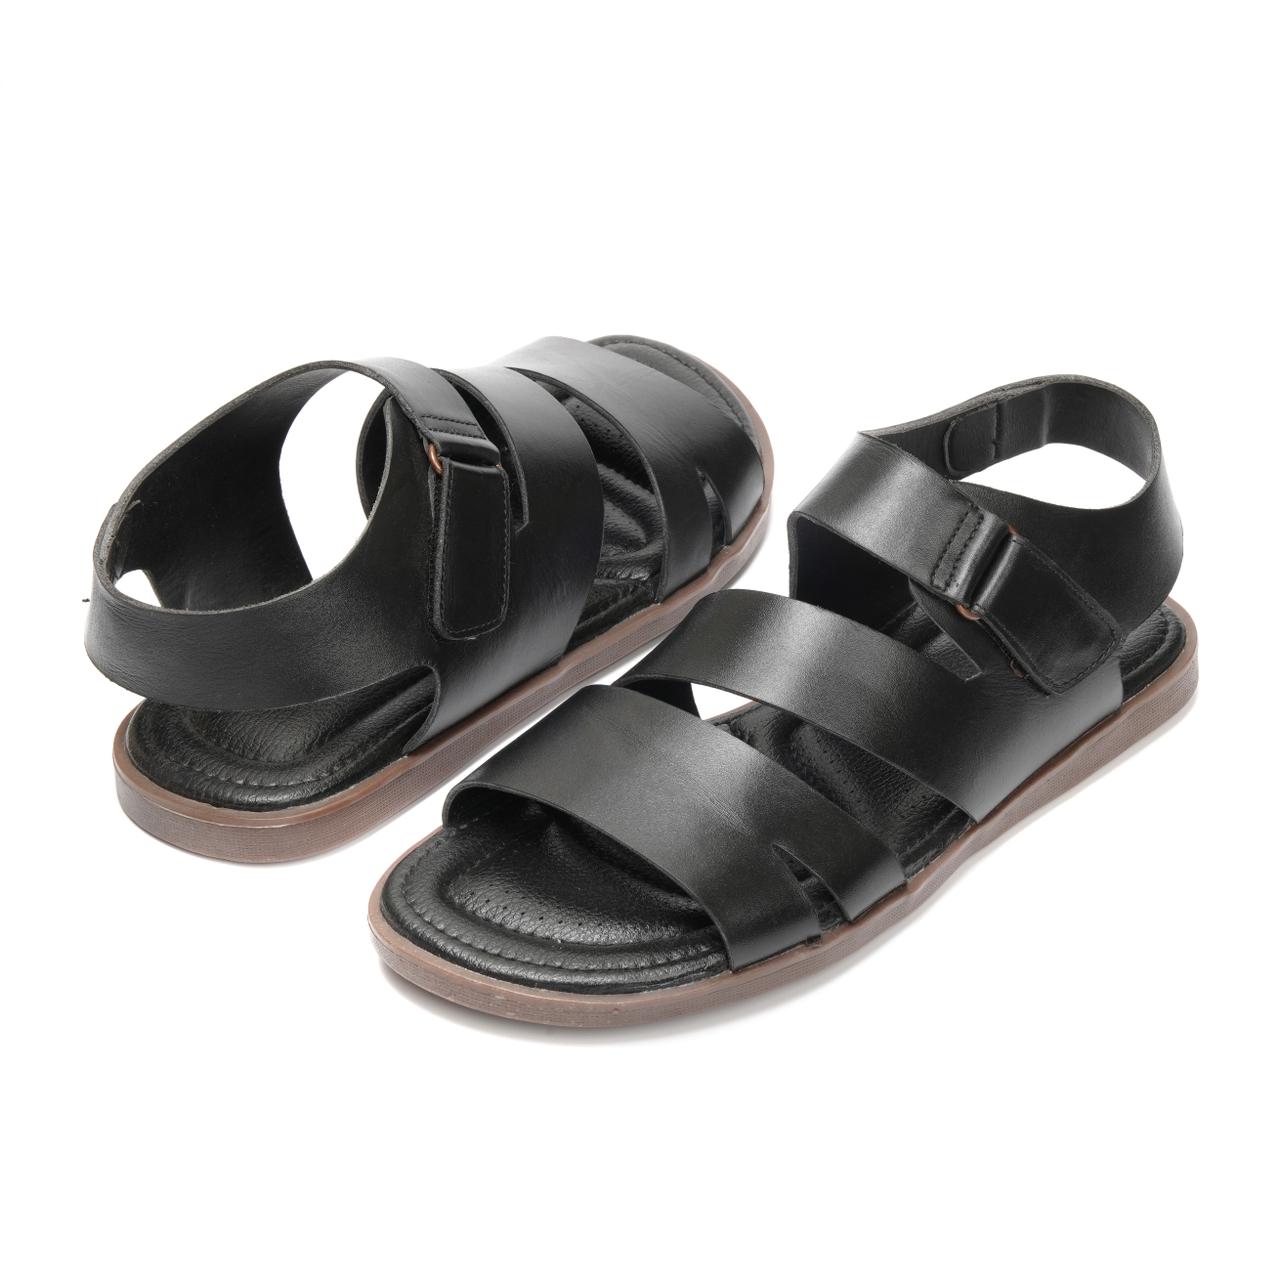 701-Black Sandal style Pure Cow Leather Shoes Trending shoes